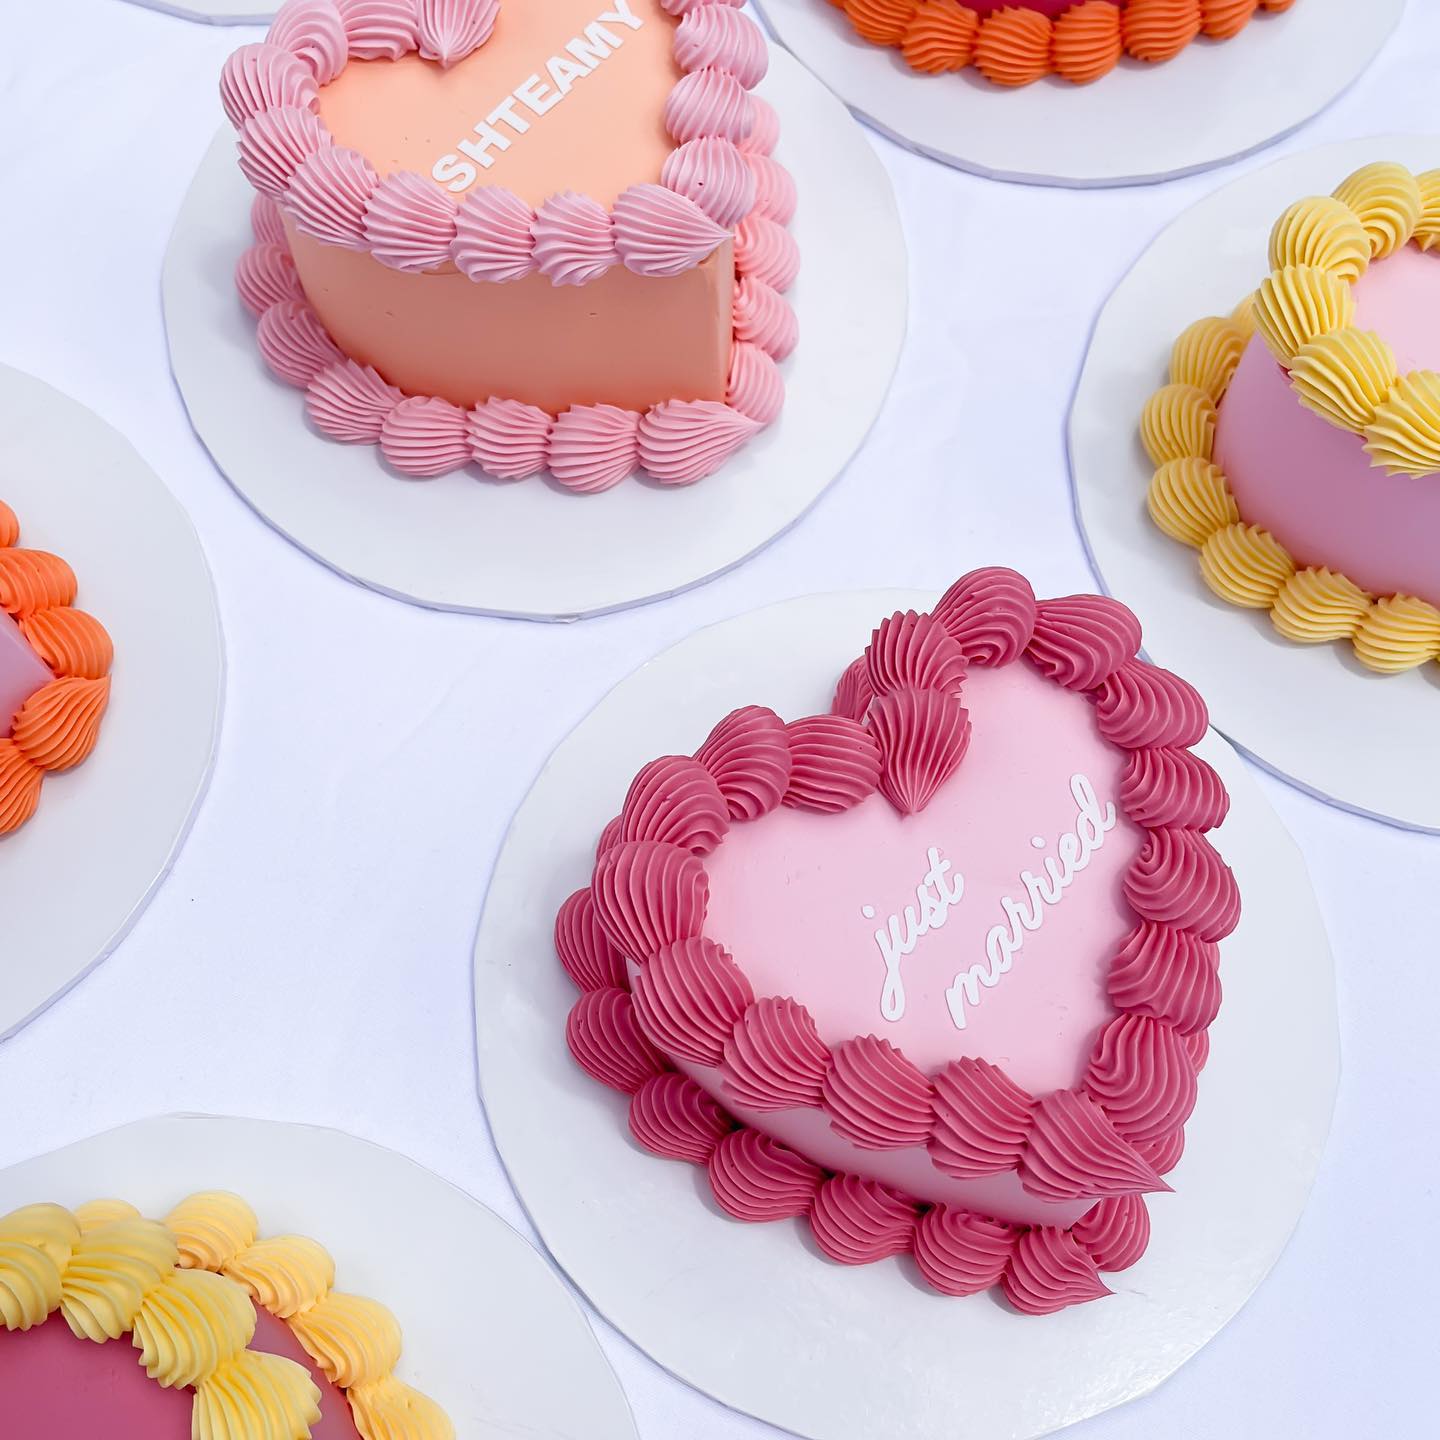 20 Best Heart Shaped Cakes: How To Make These Sweet Ideas - Parade